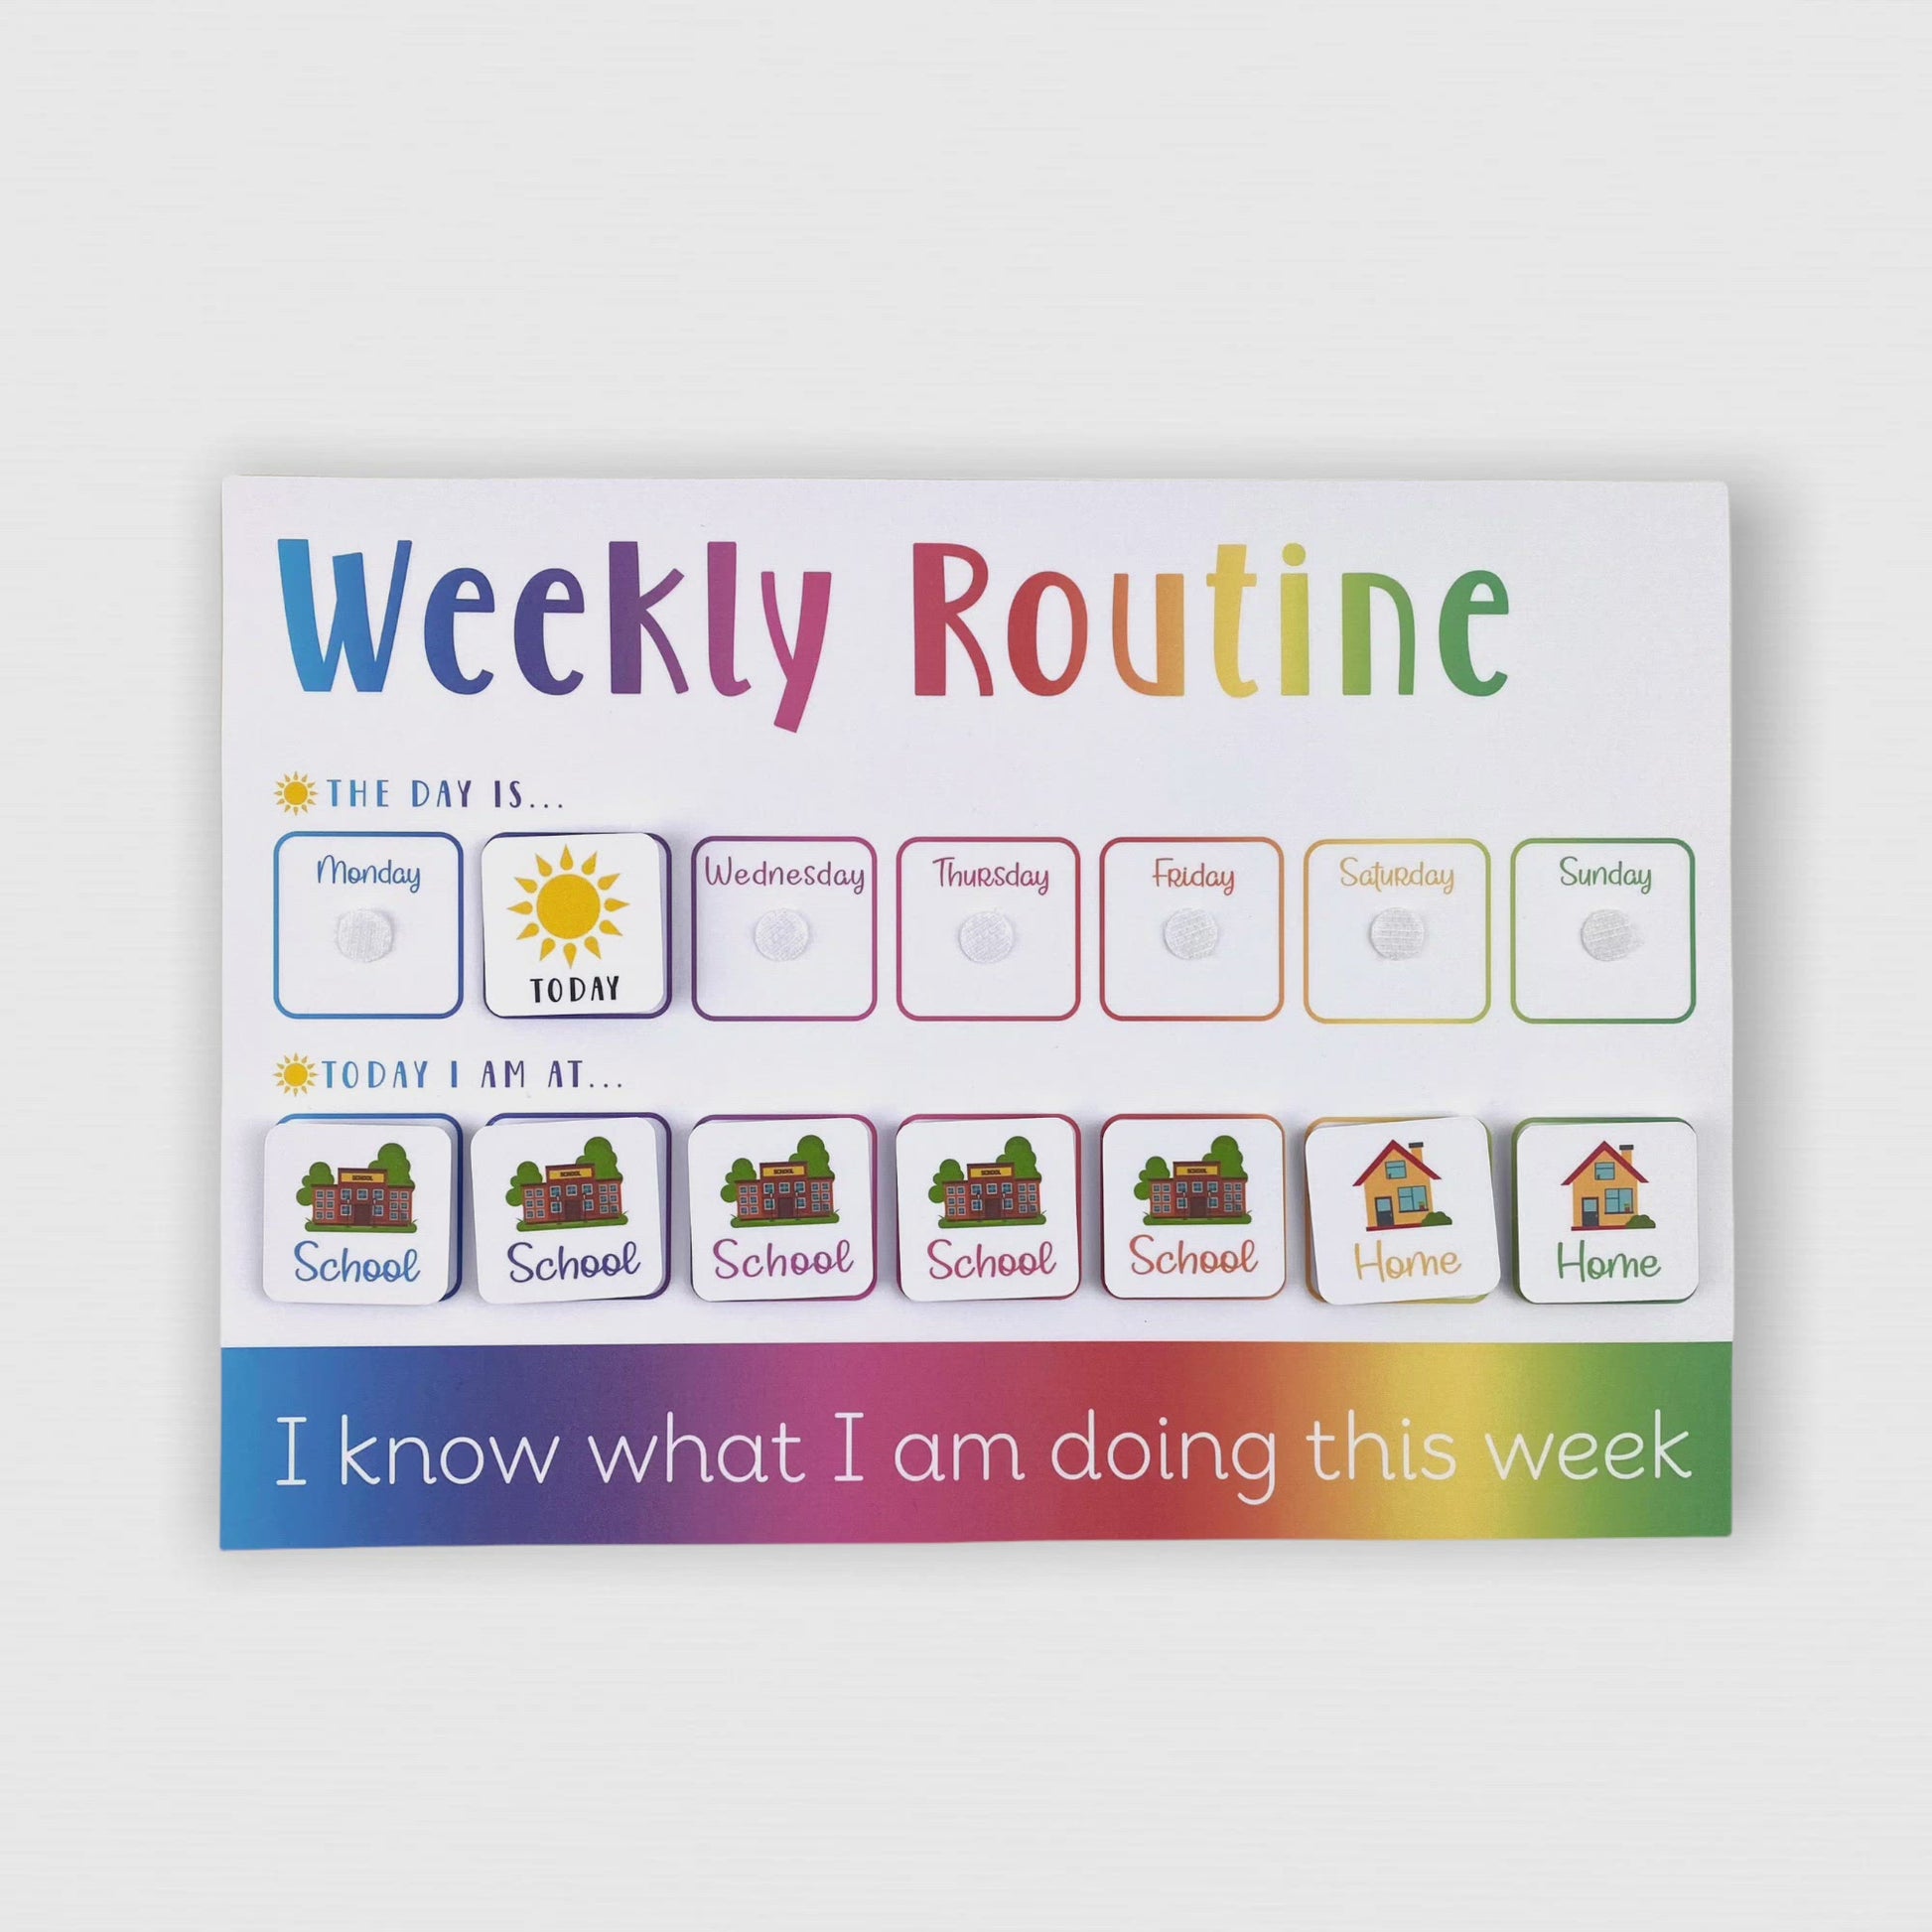 Children's Weekly Routine Chart for ASD | Autism Resources